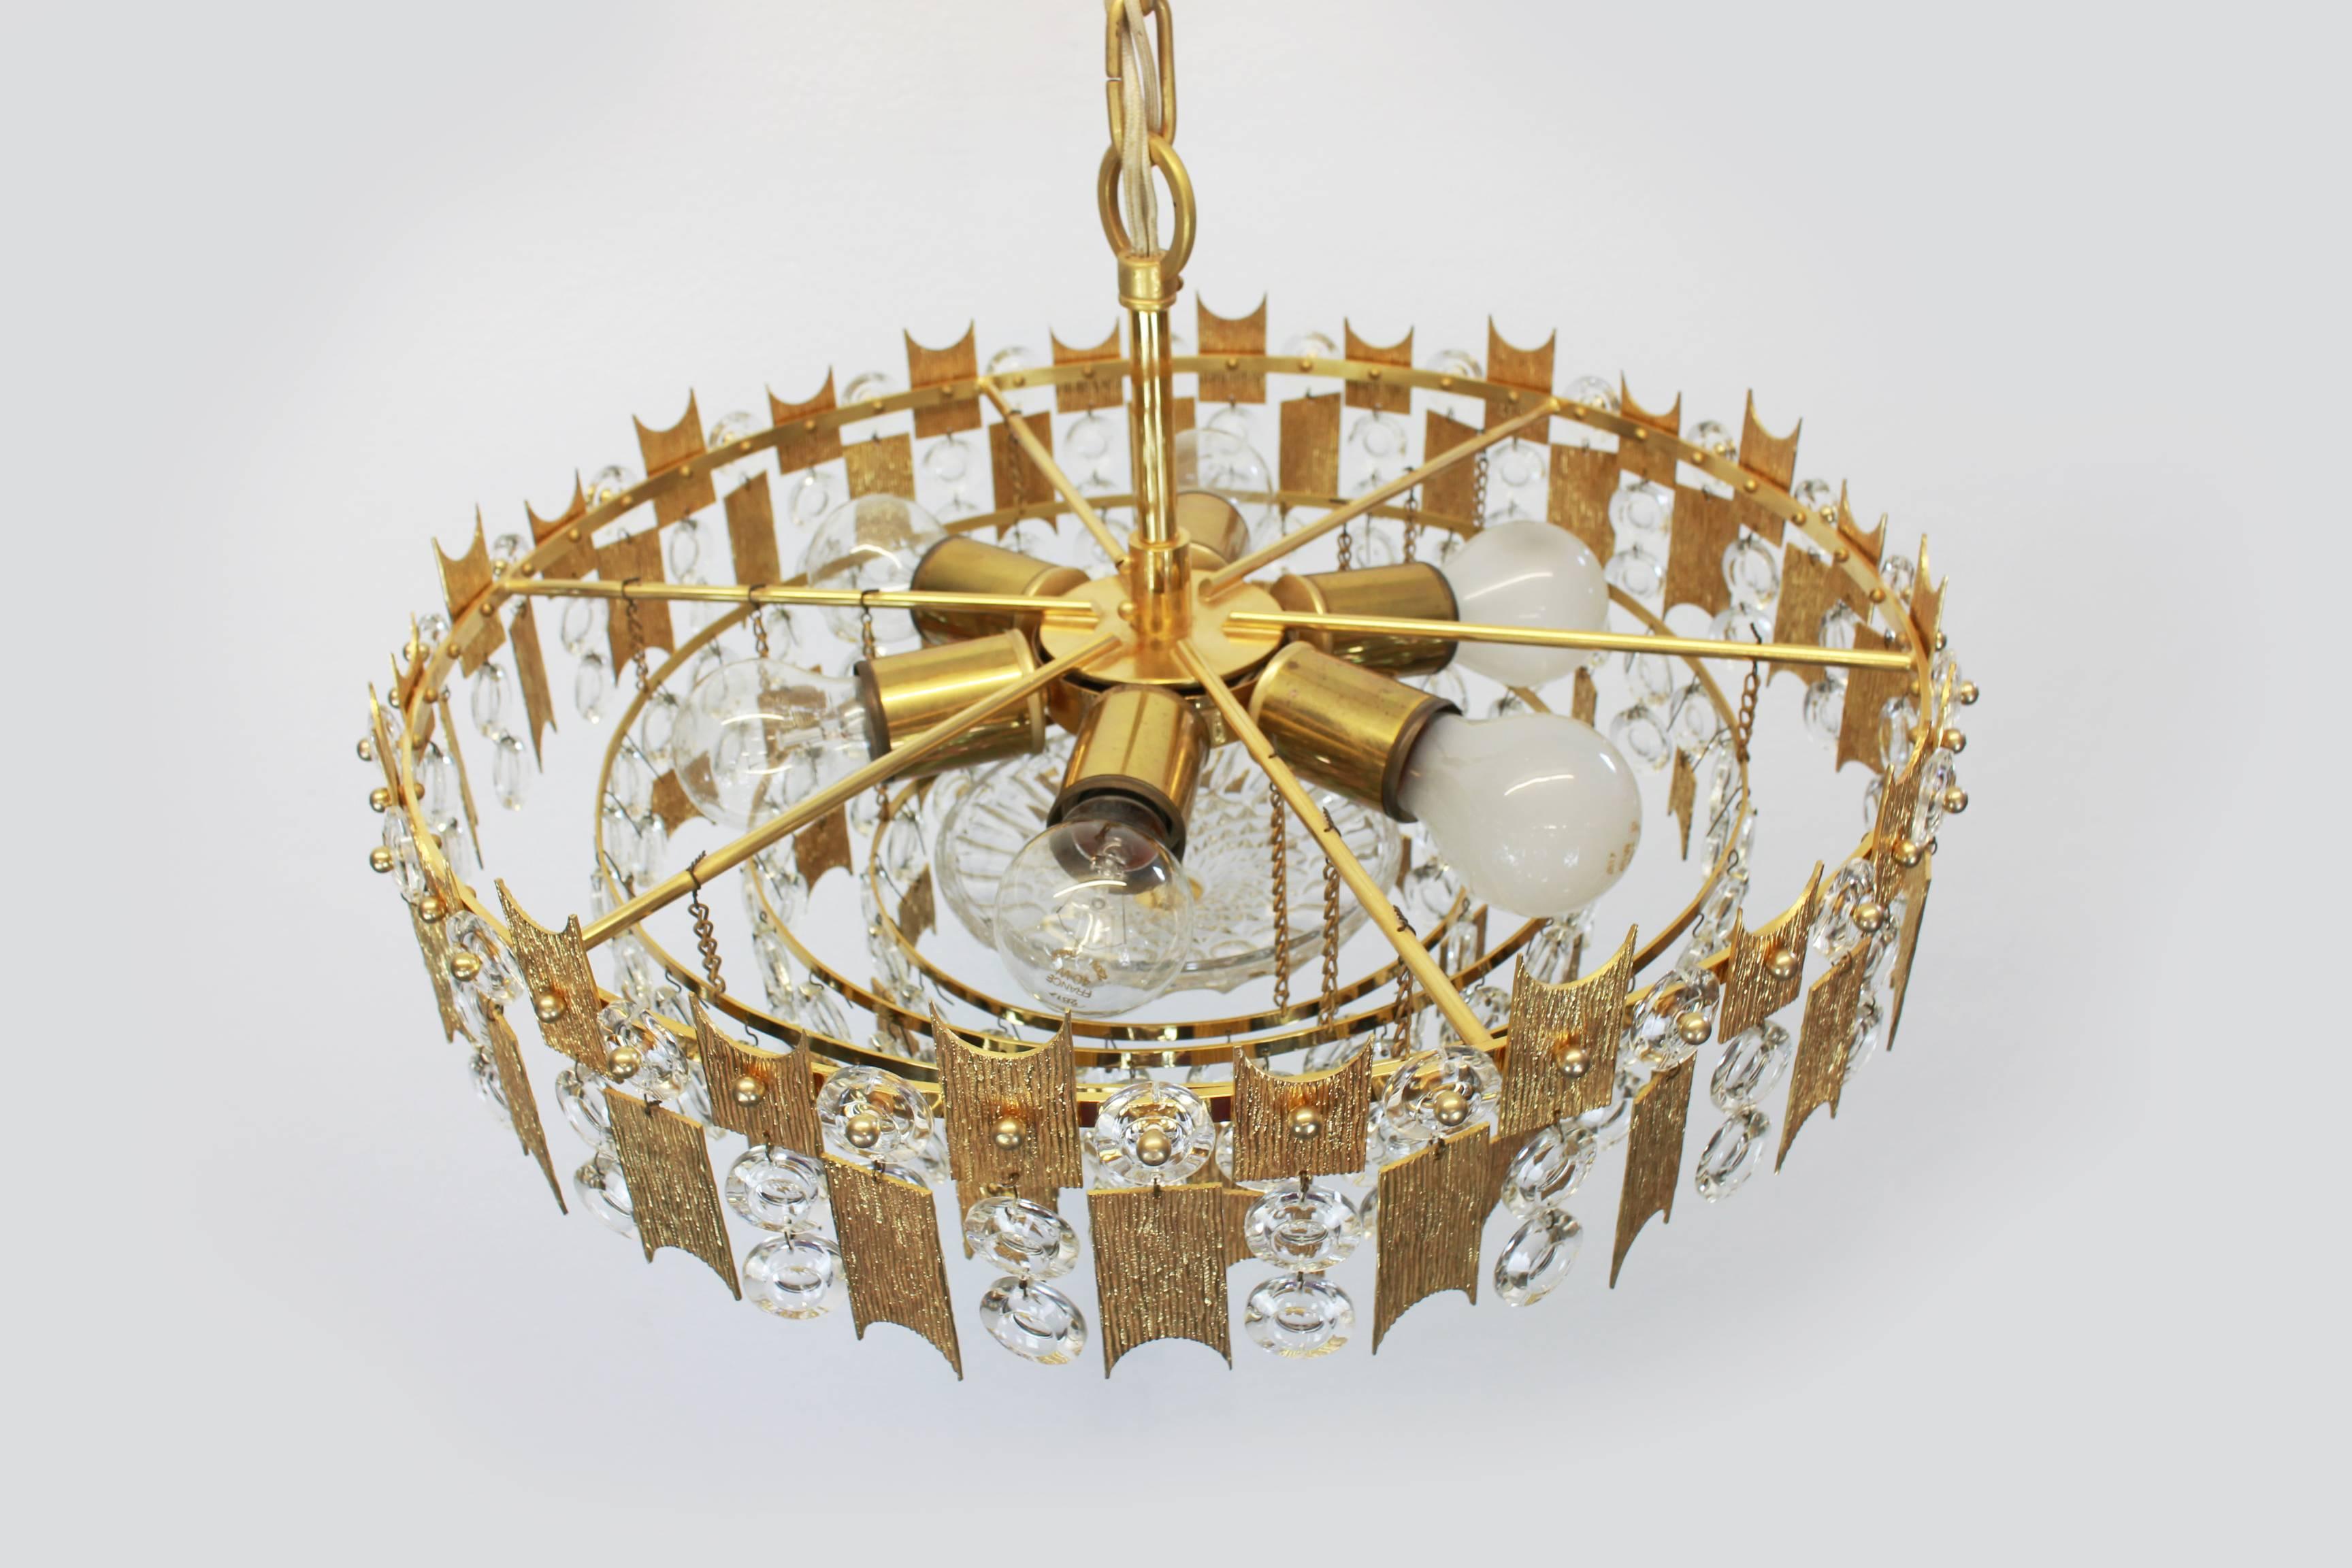 A stunning chandelier by Palwa (Palme and Walter), Germany, manufactured in 1960s. It’s composed of jewel-like glass pieces and brass plates with a Brutalist relief.

Sockets: It needs six x E27 standard bulbs to illuminate.
Perfect